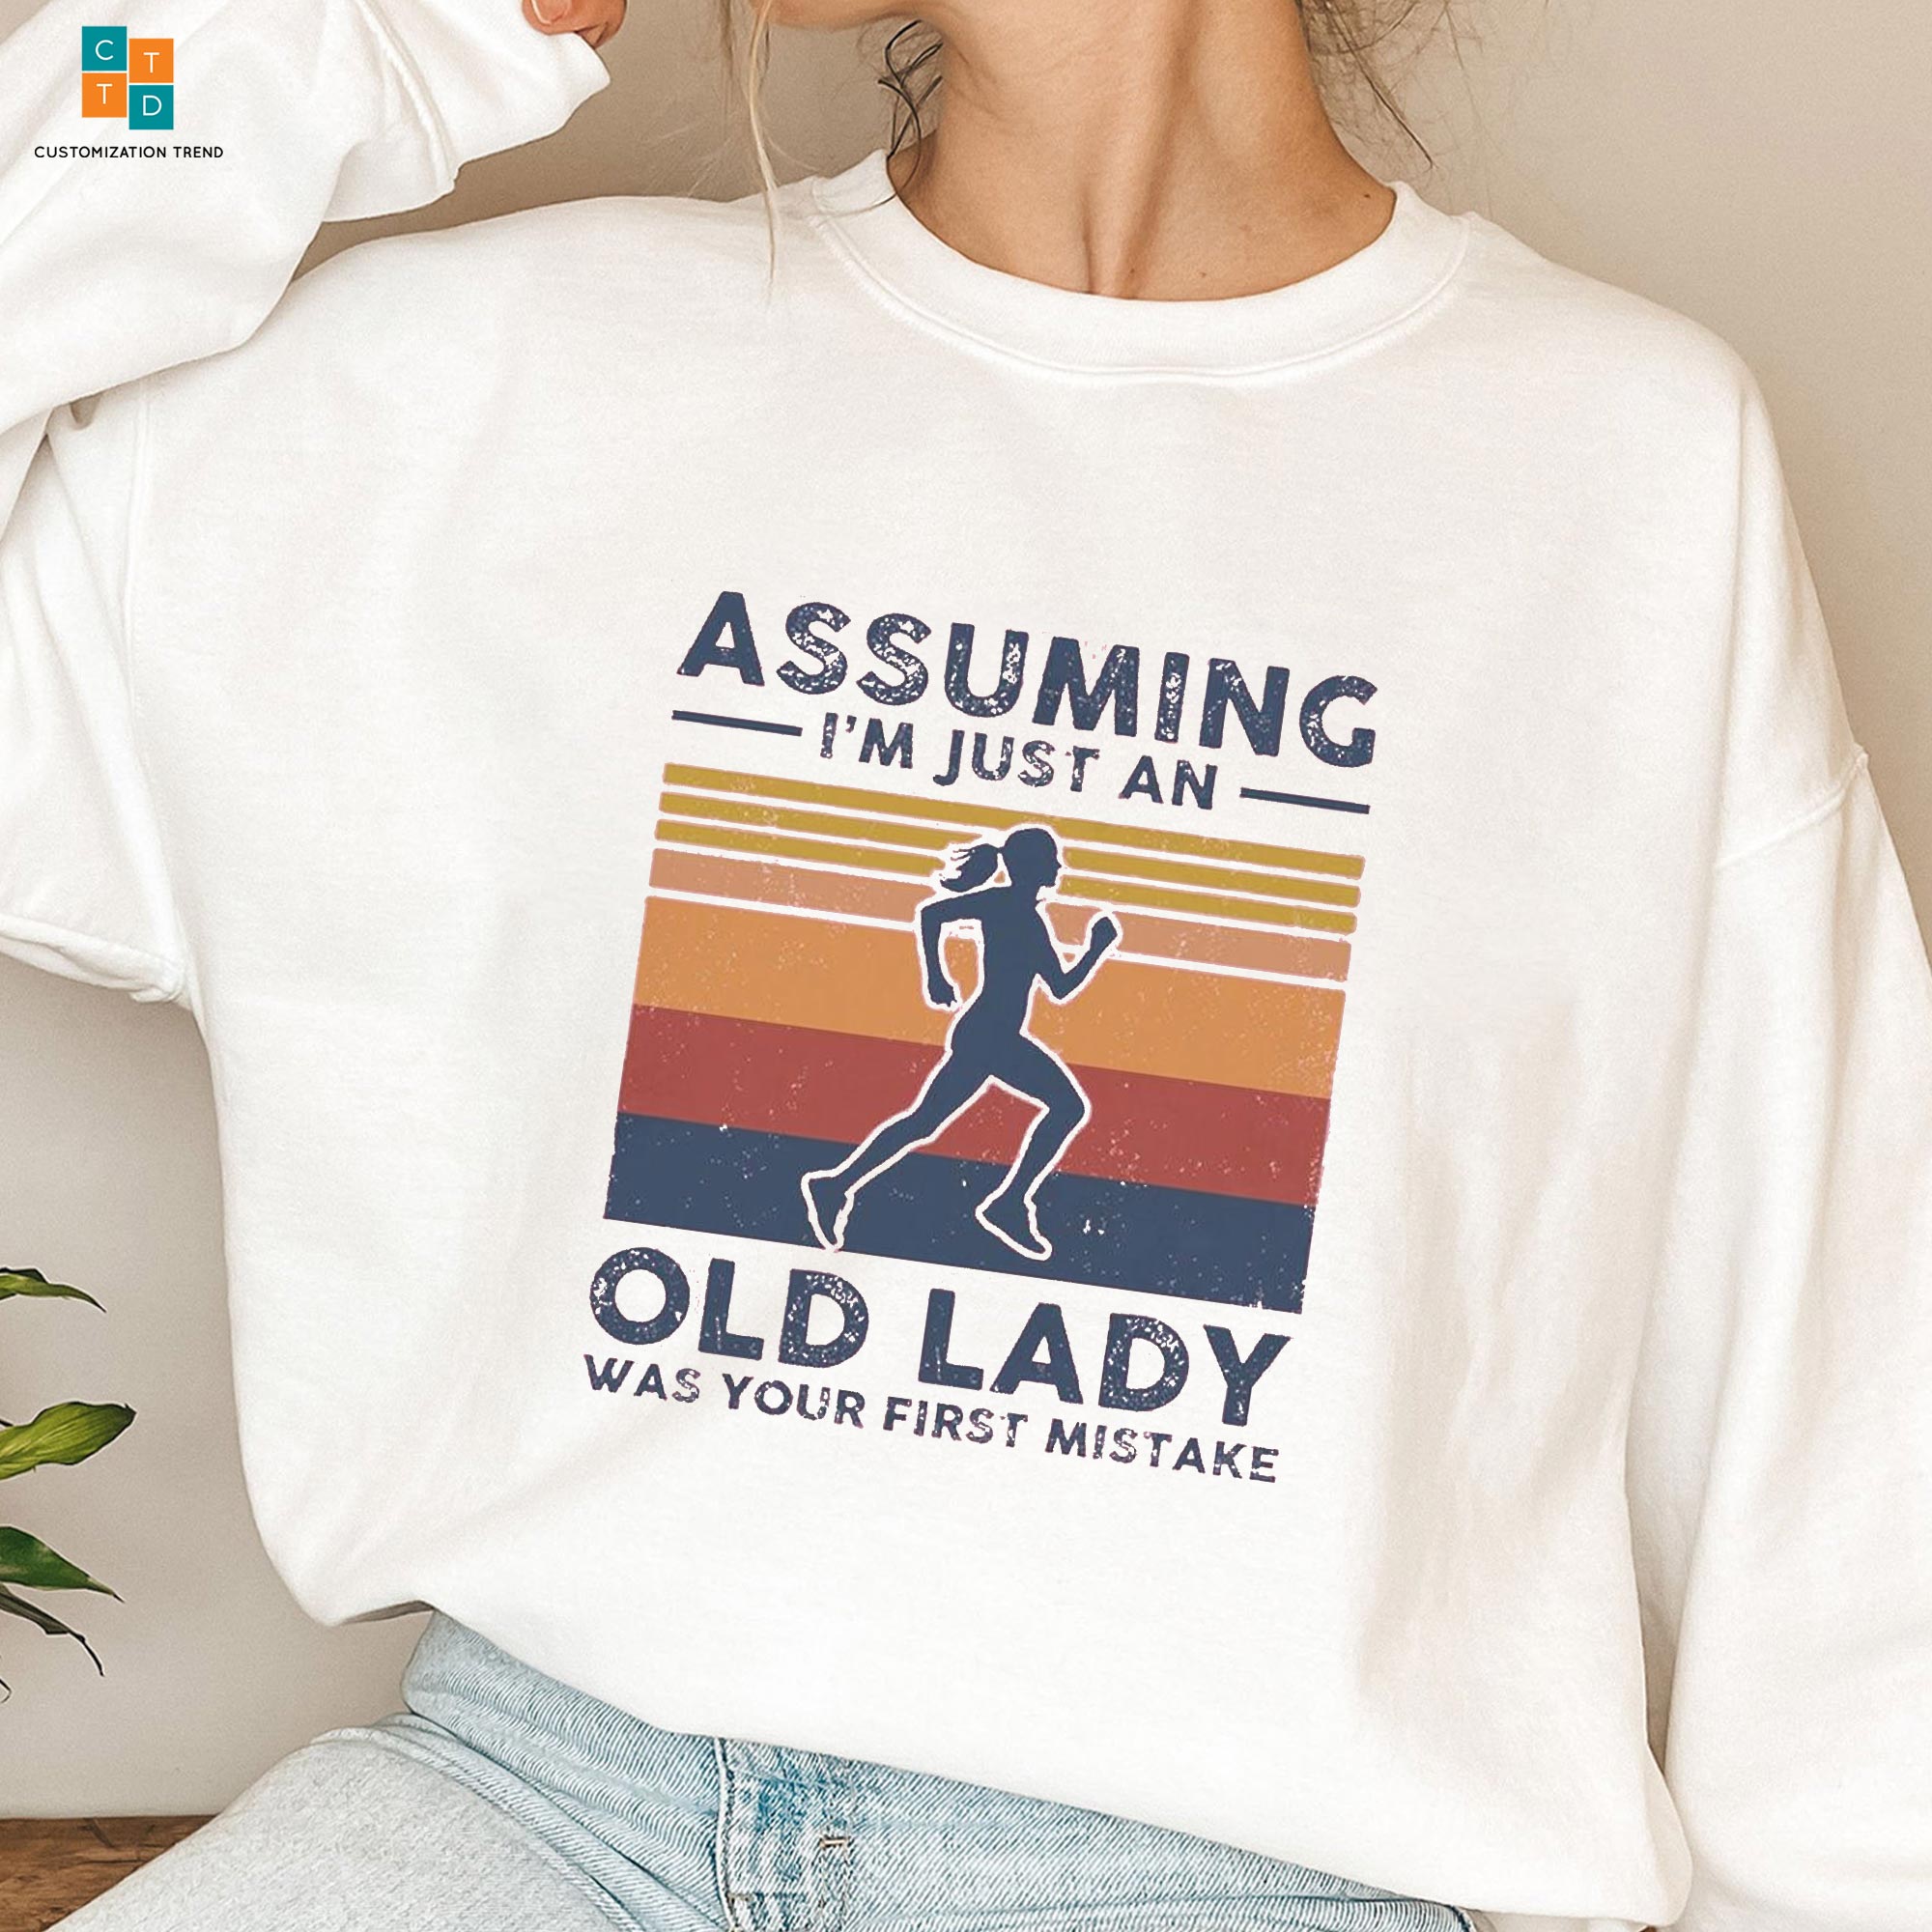 Assuming I’m Just An Old Lady Running Hoodie, Shirt